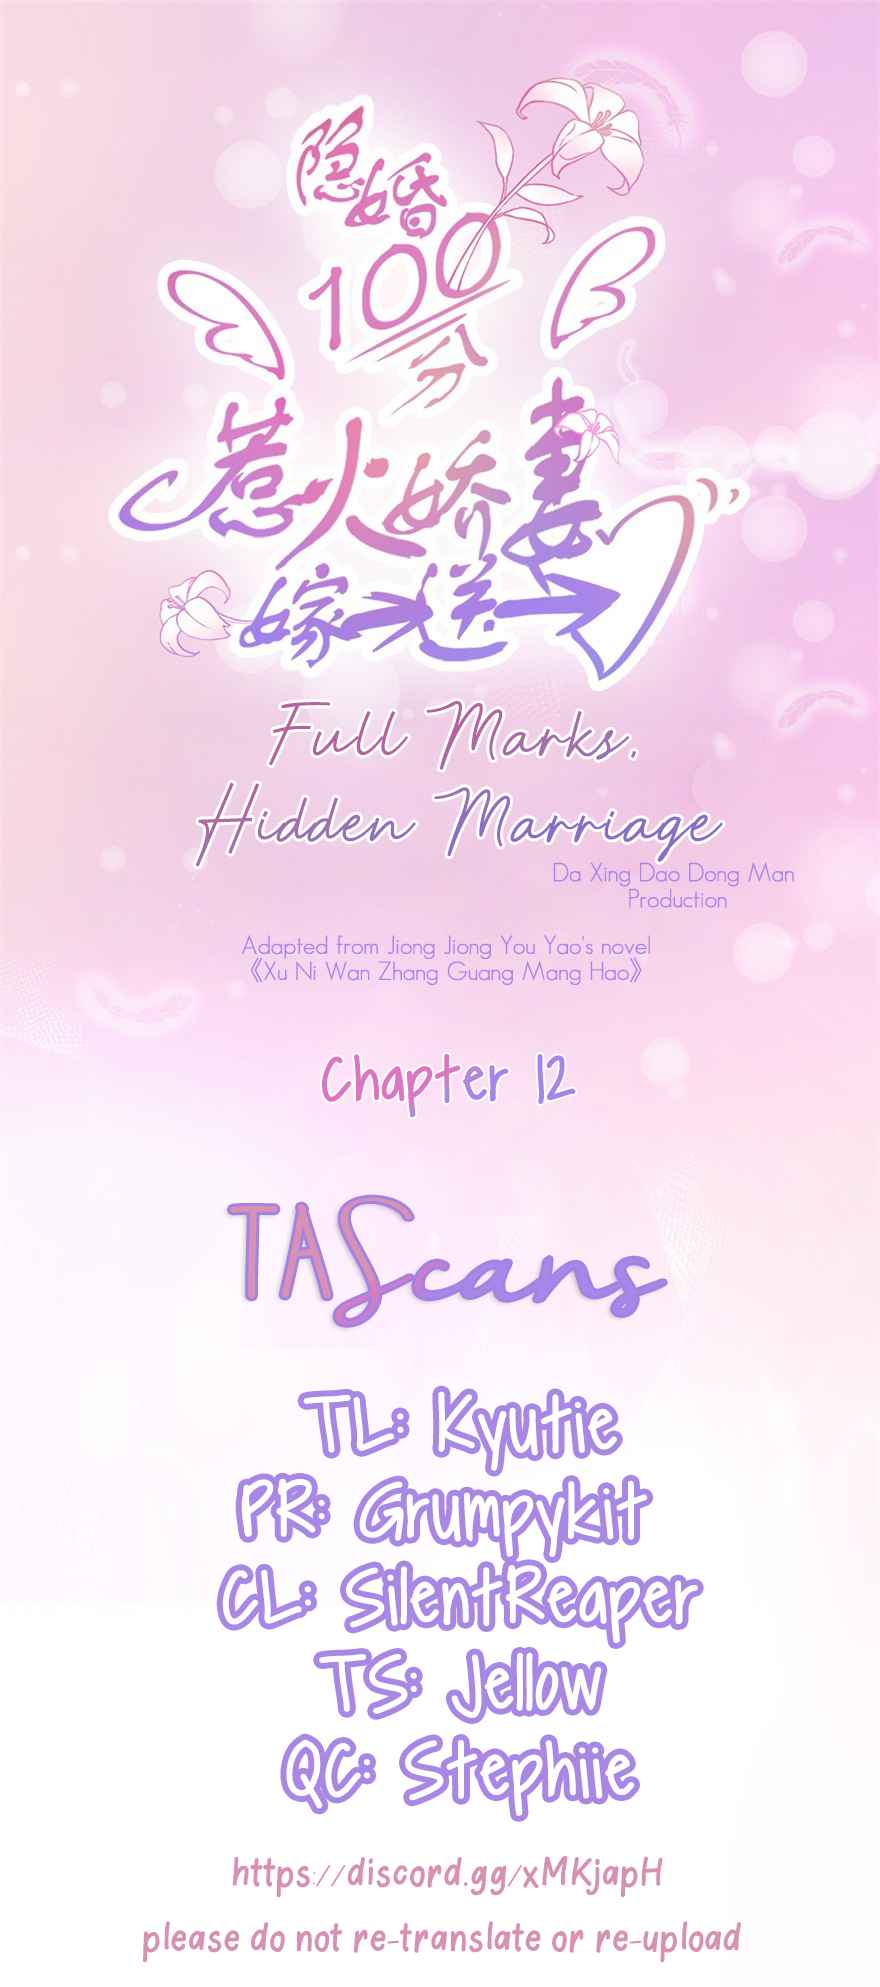 Full Marks, Hidden Marriage (大行道动漫) Ch. 12 With you, still want to mock me?